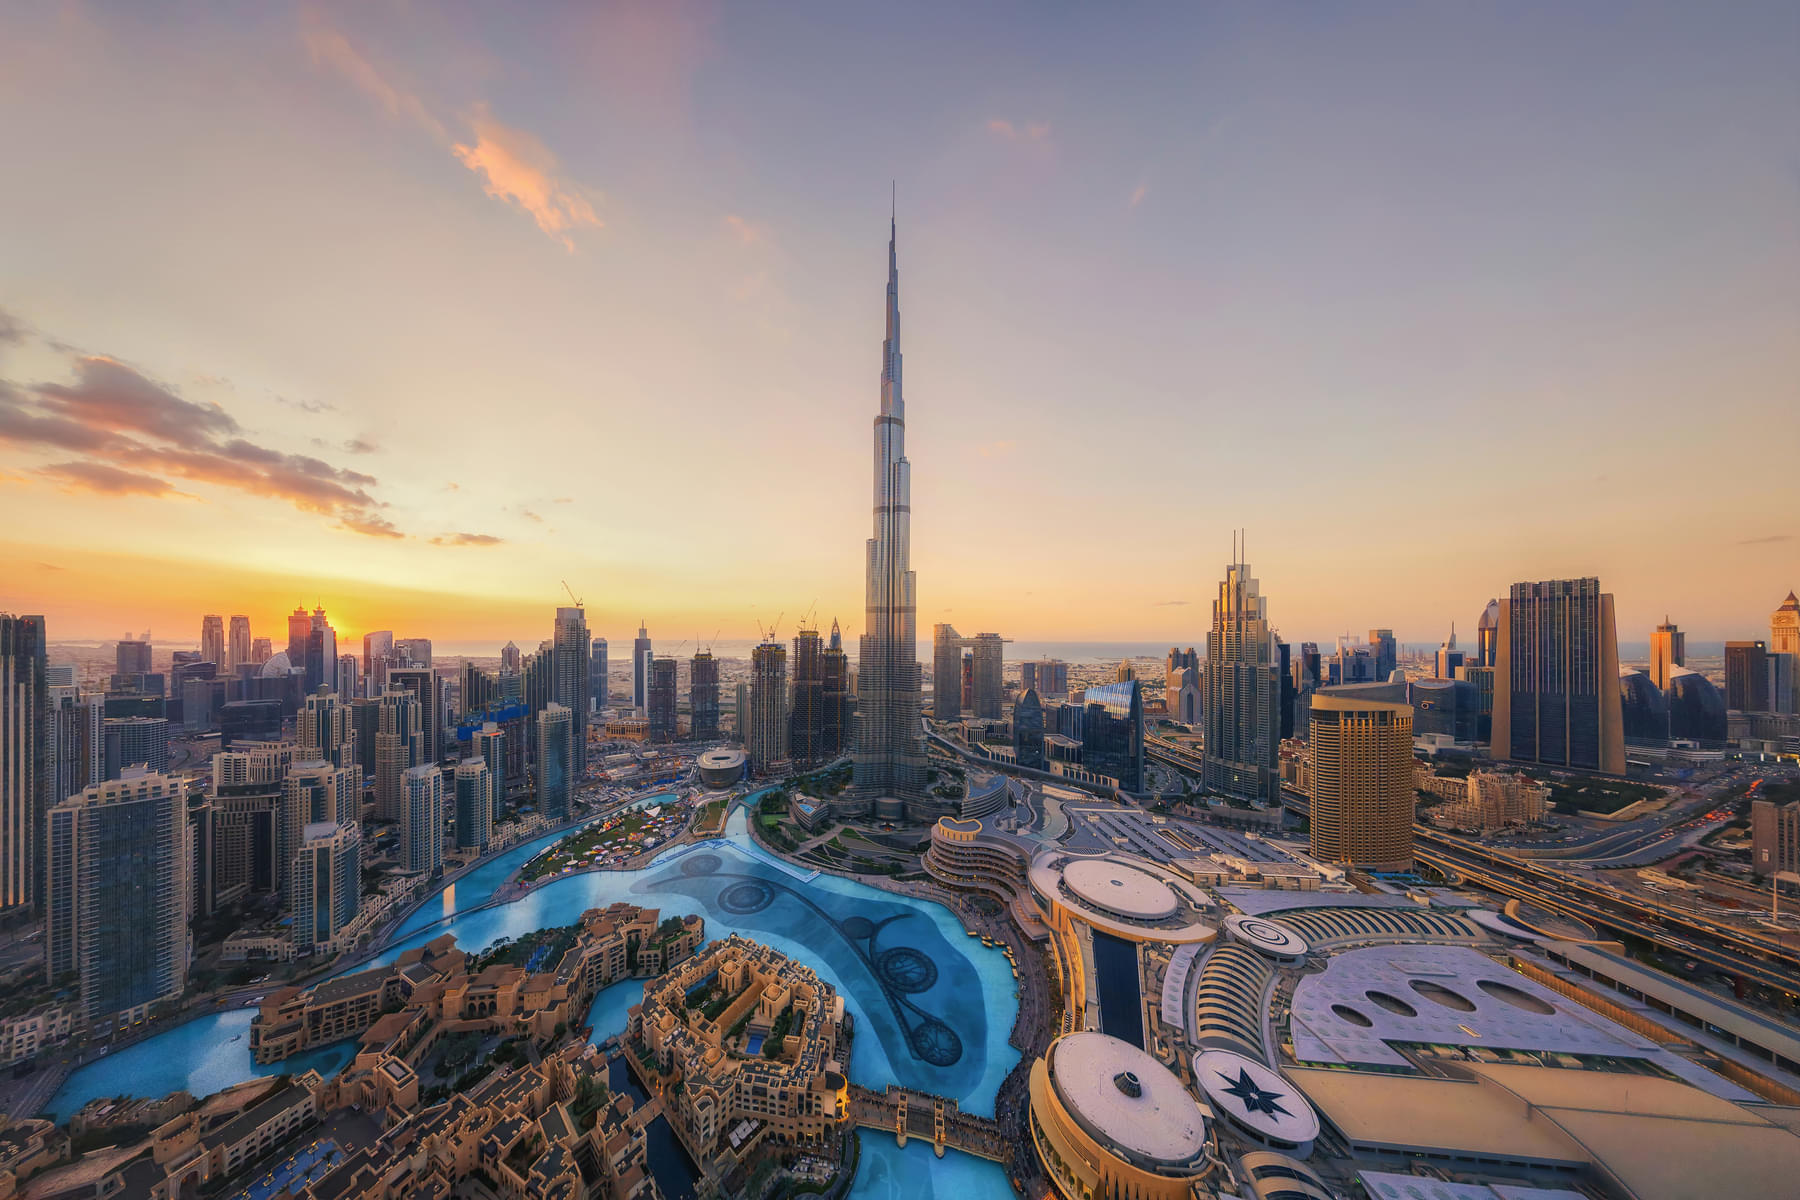 Soak in the magnificent beauty of the world's tallest building, Burj Khalifa